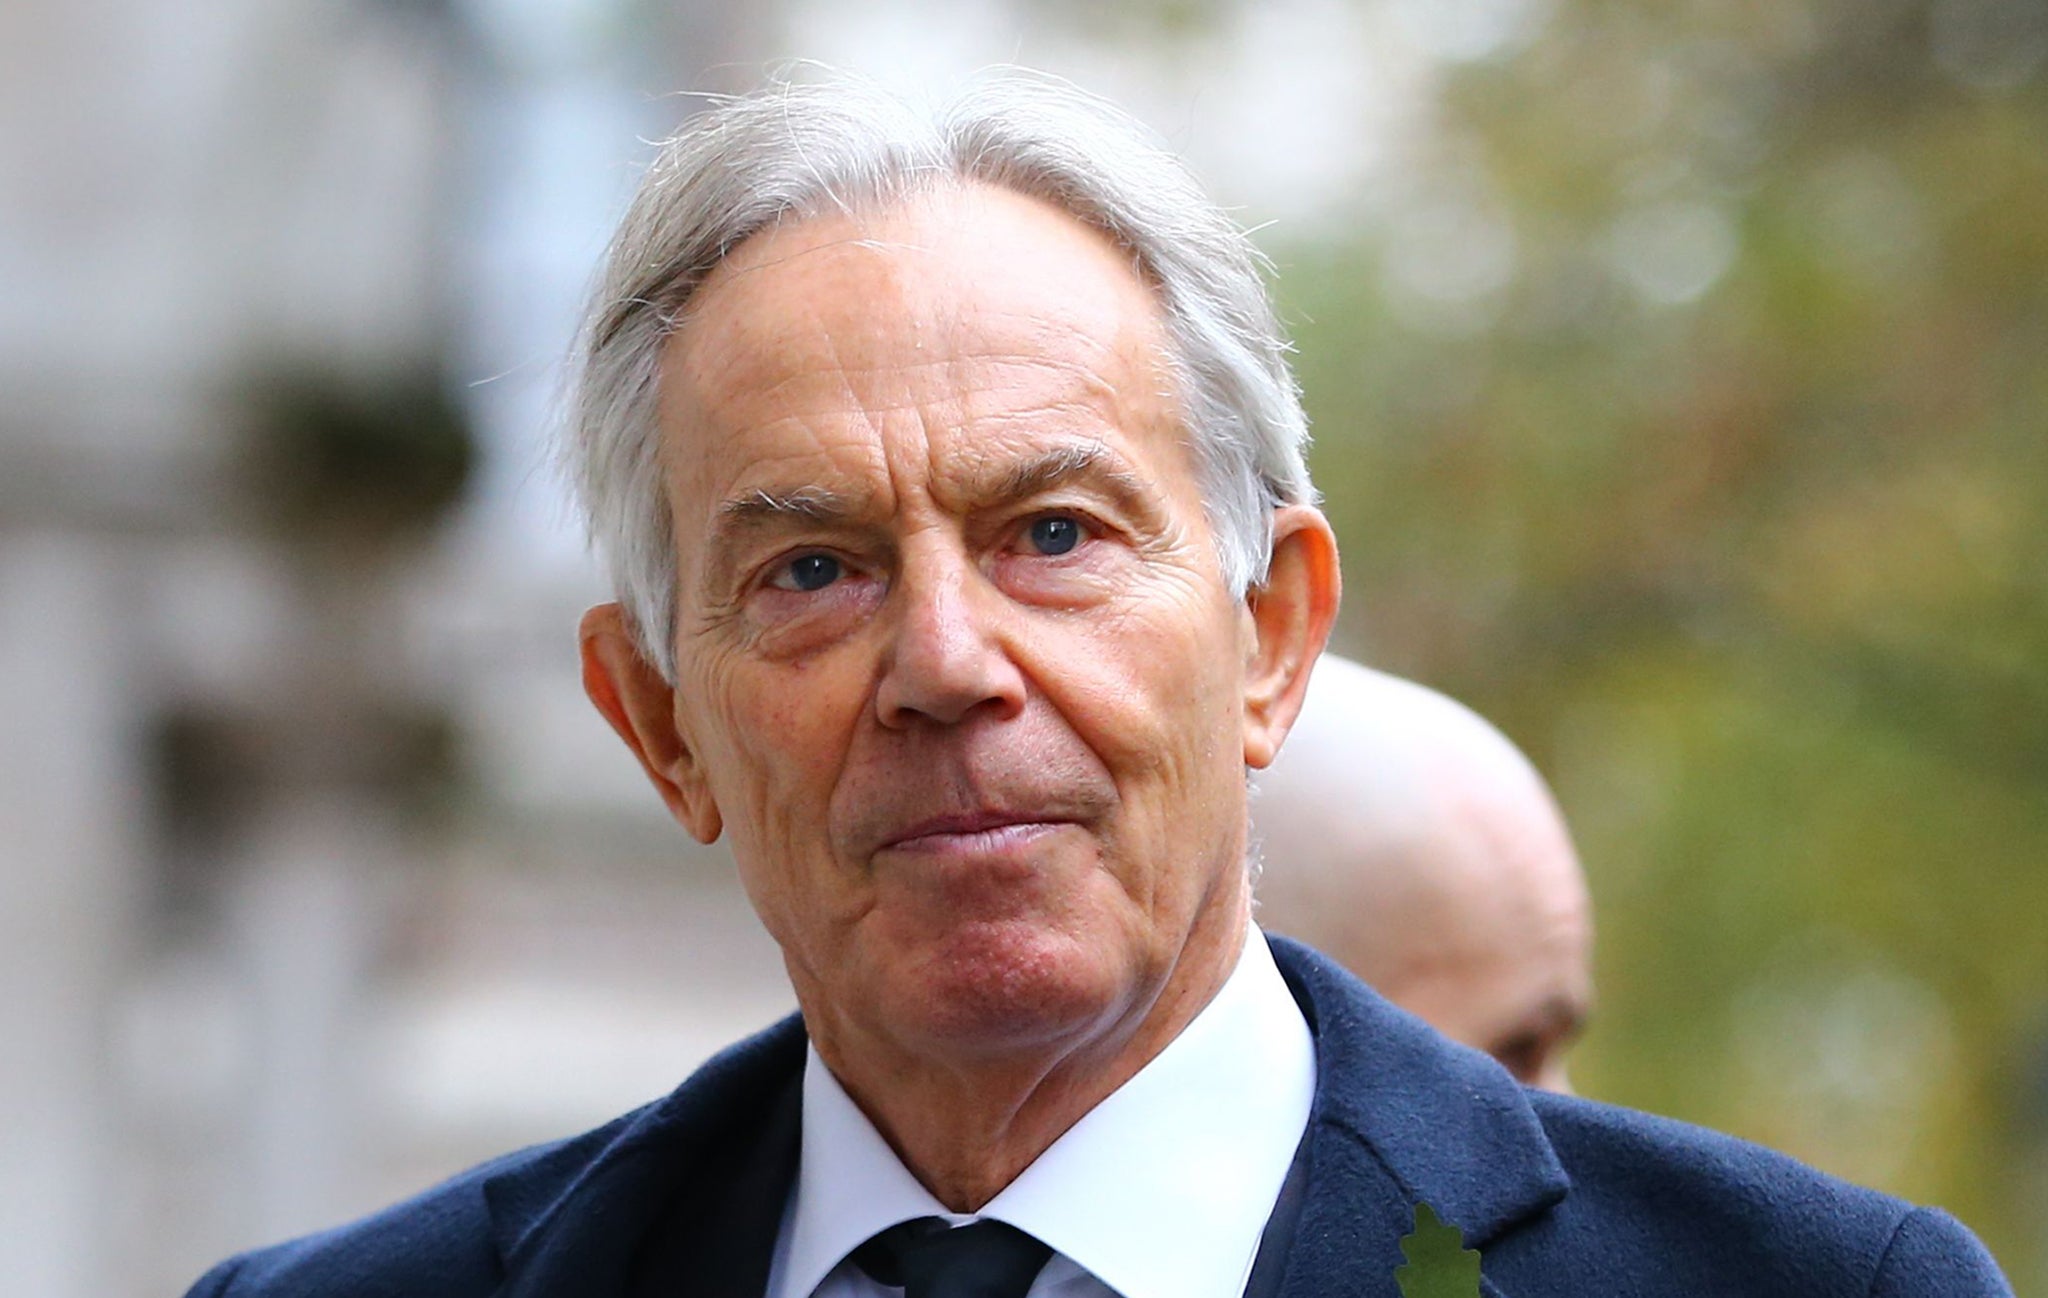 Tony Blair’s advice to the Labour Party to reject ‘wokeism’ and ‘Corbynism’ sparks debate